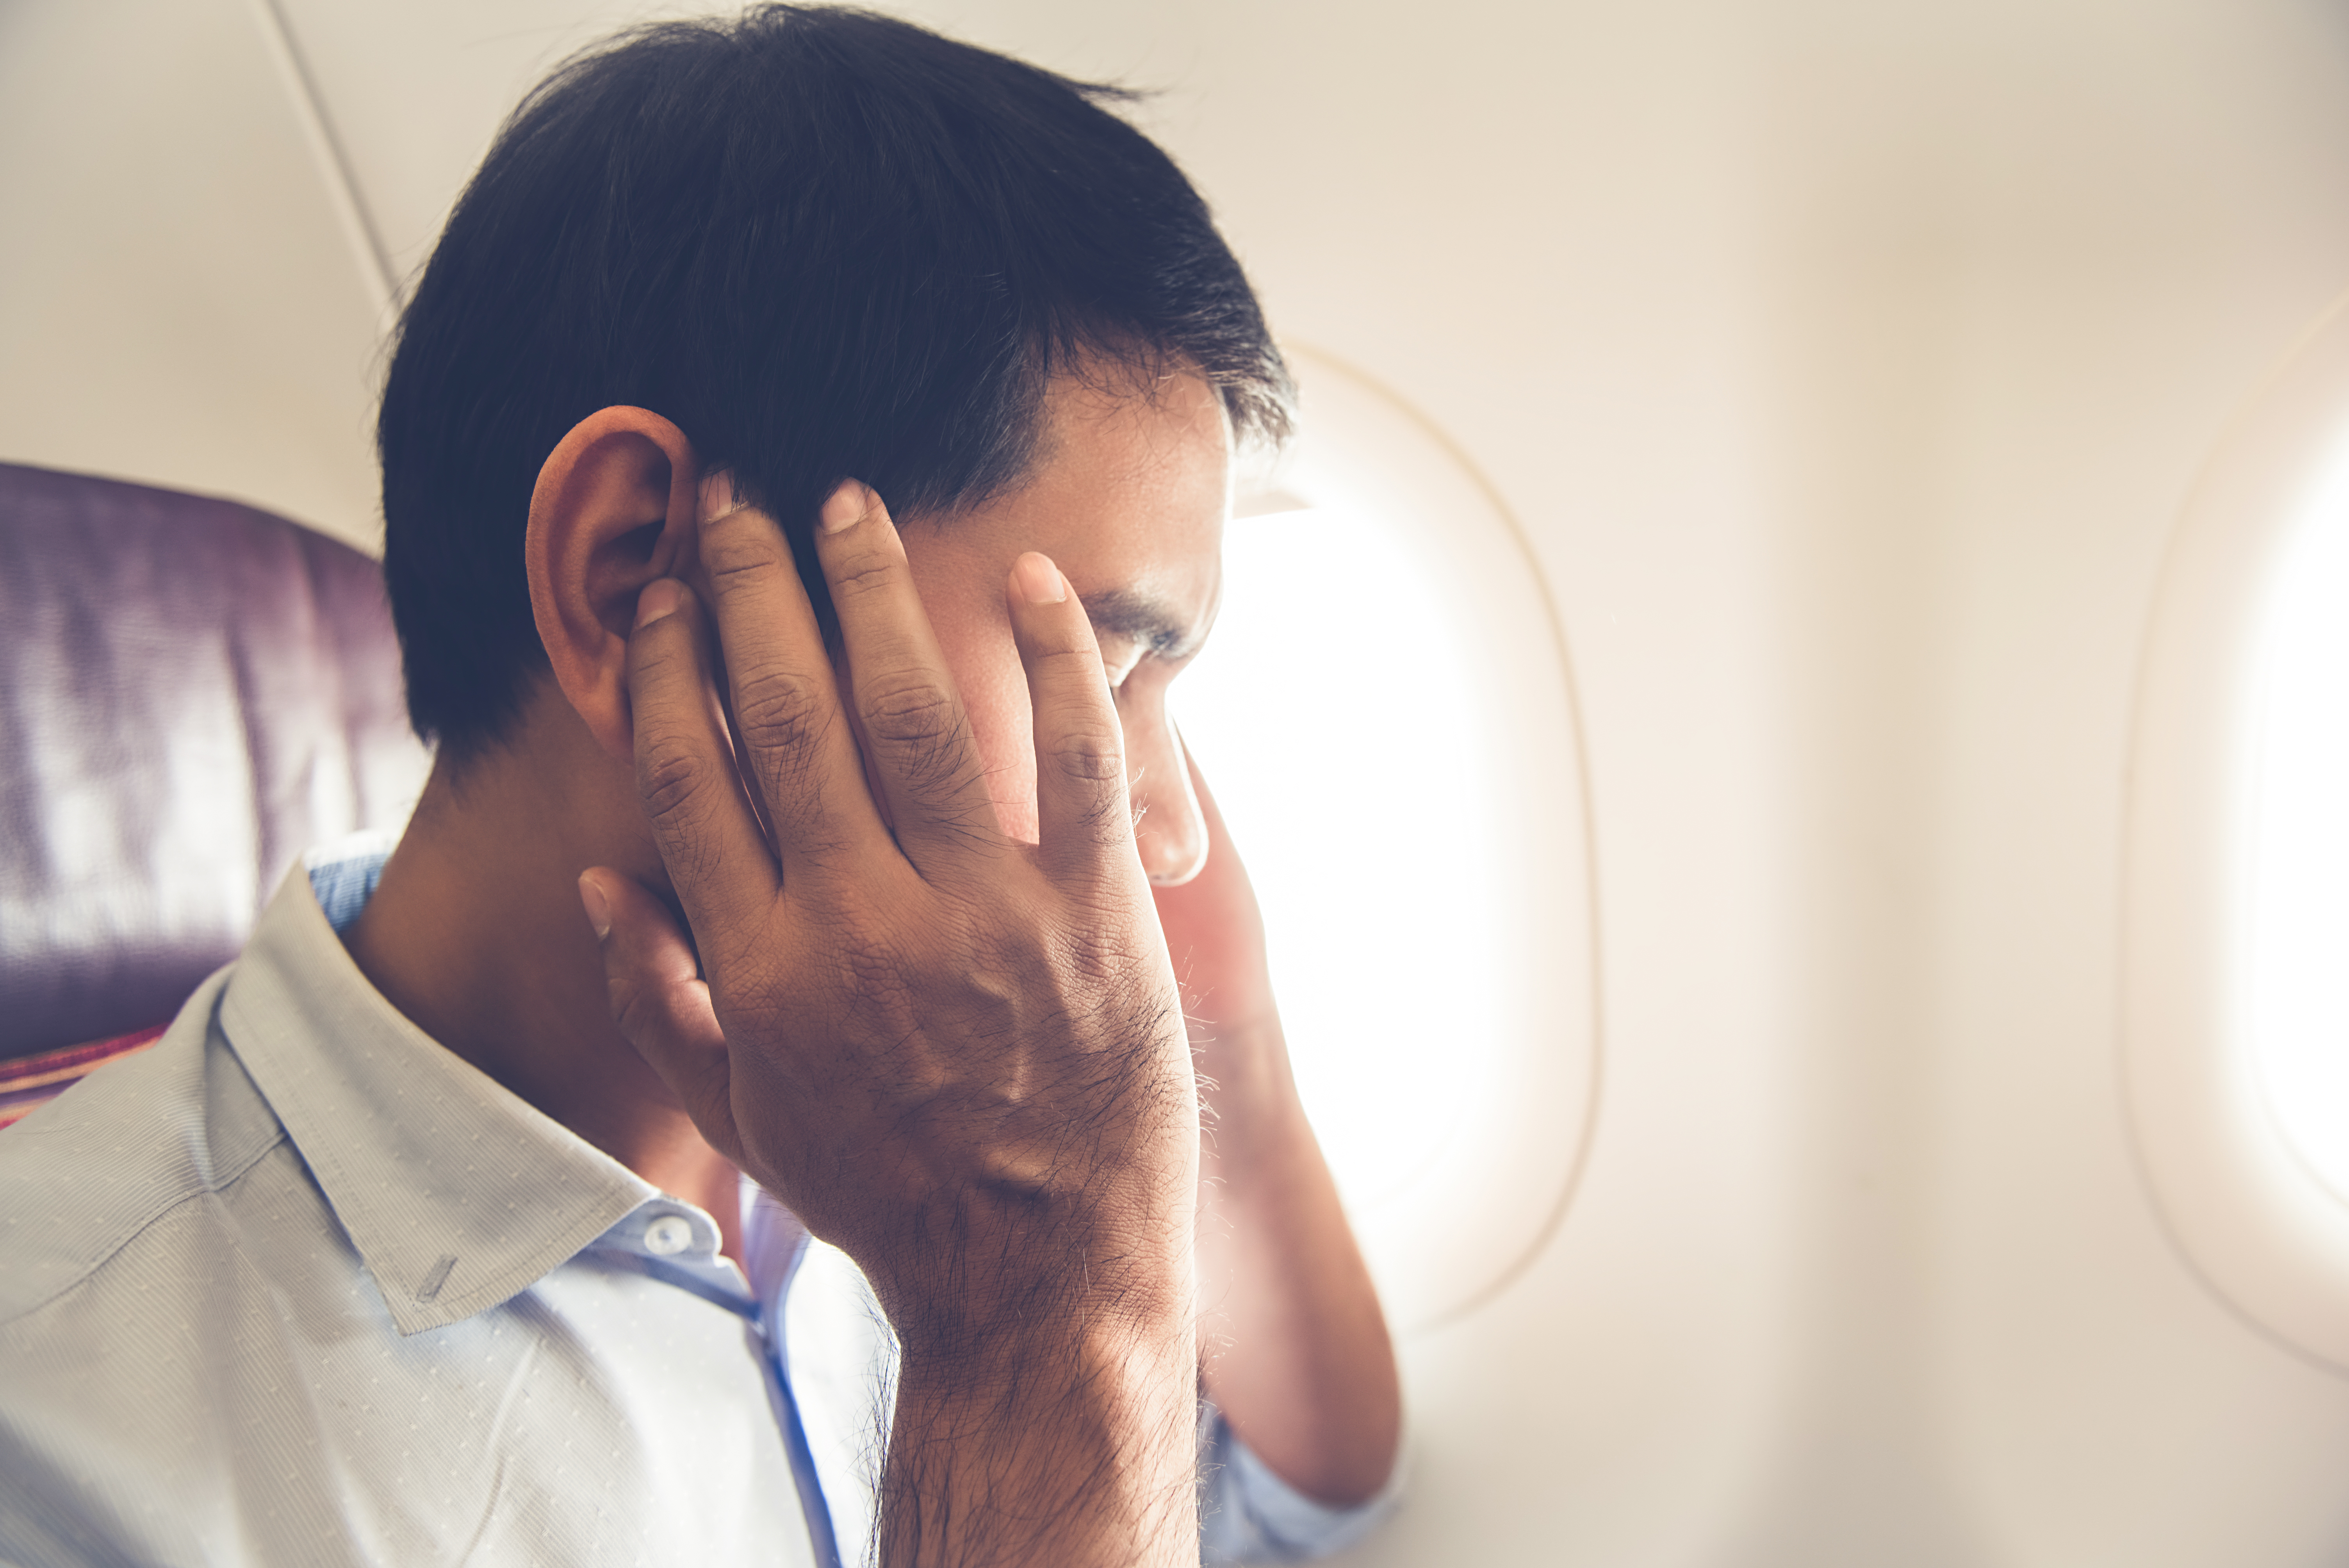 A frustrated male airplane passenger | Source: Shutterstock